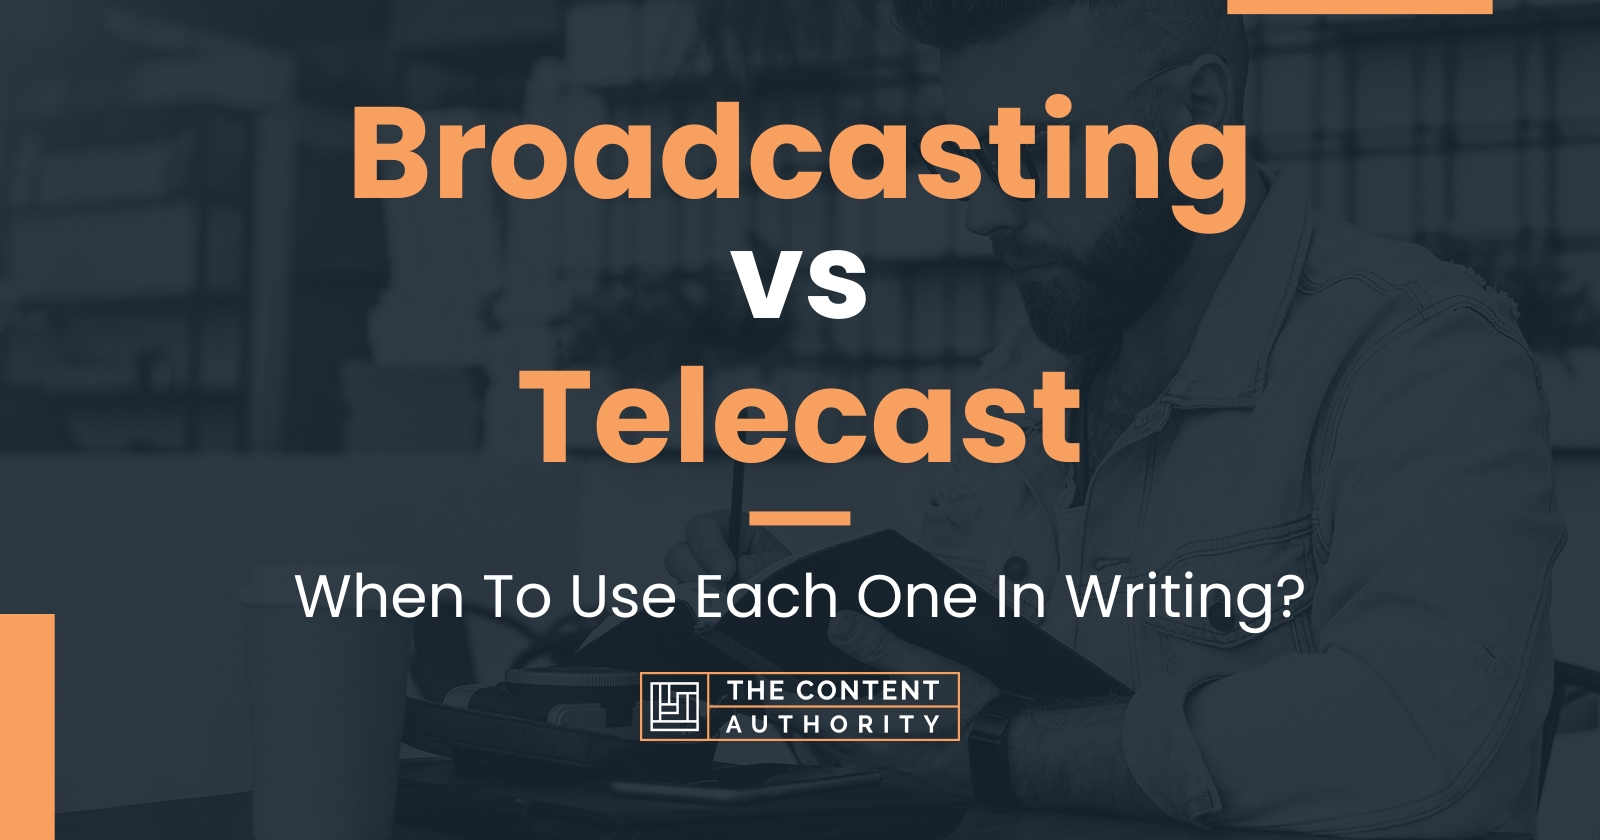 Broadcasting vs Telecast: When To Use Each One In Writing?